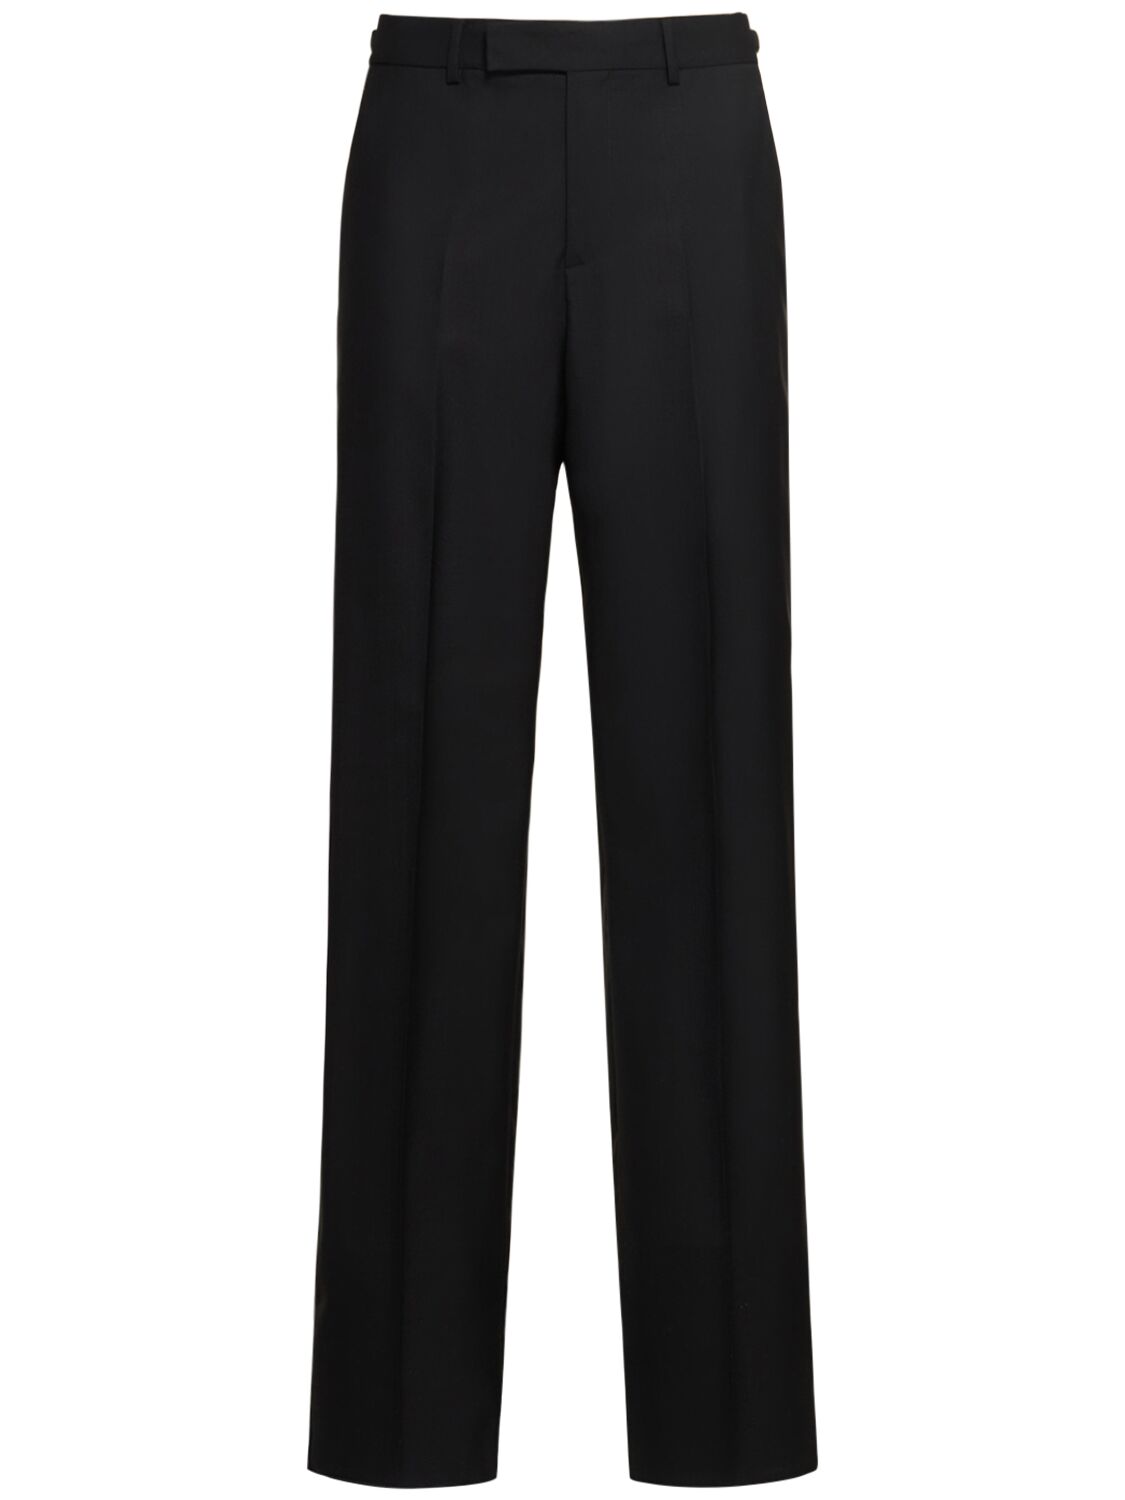 Image of Formal Wool Canvas Pants